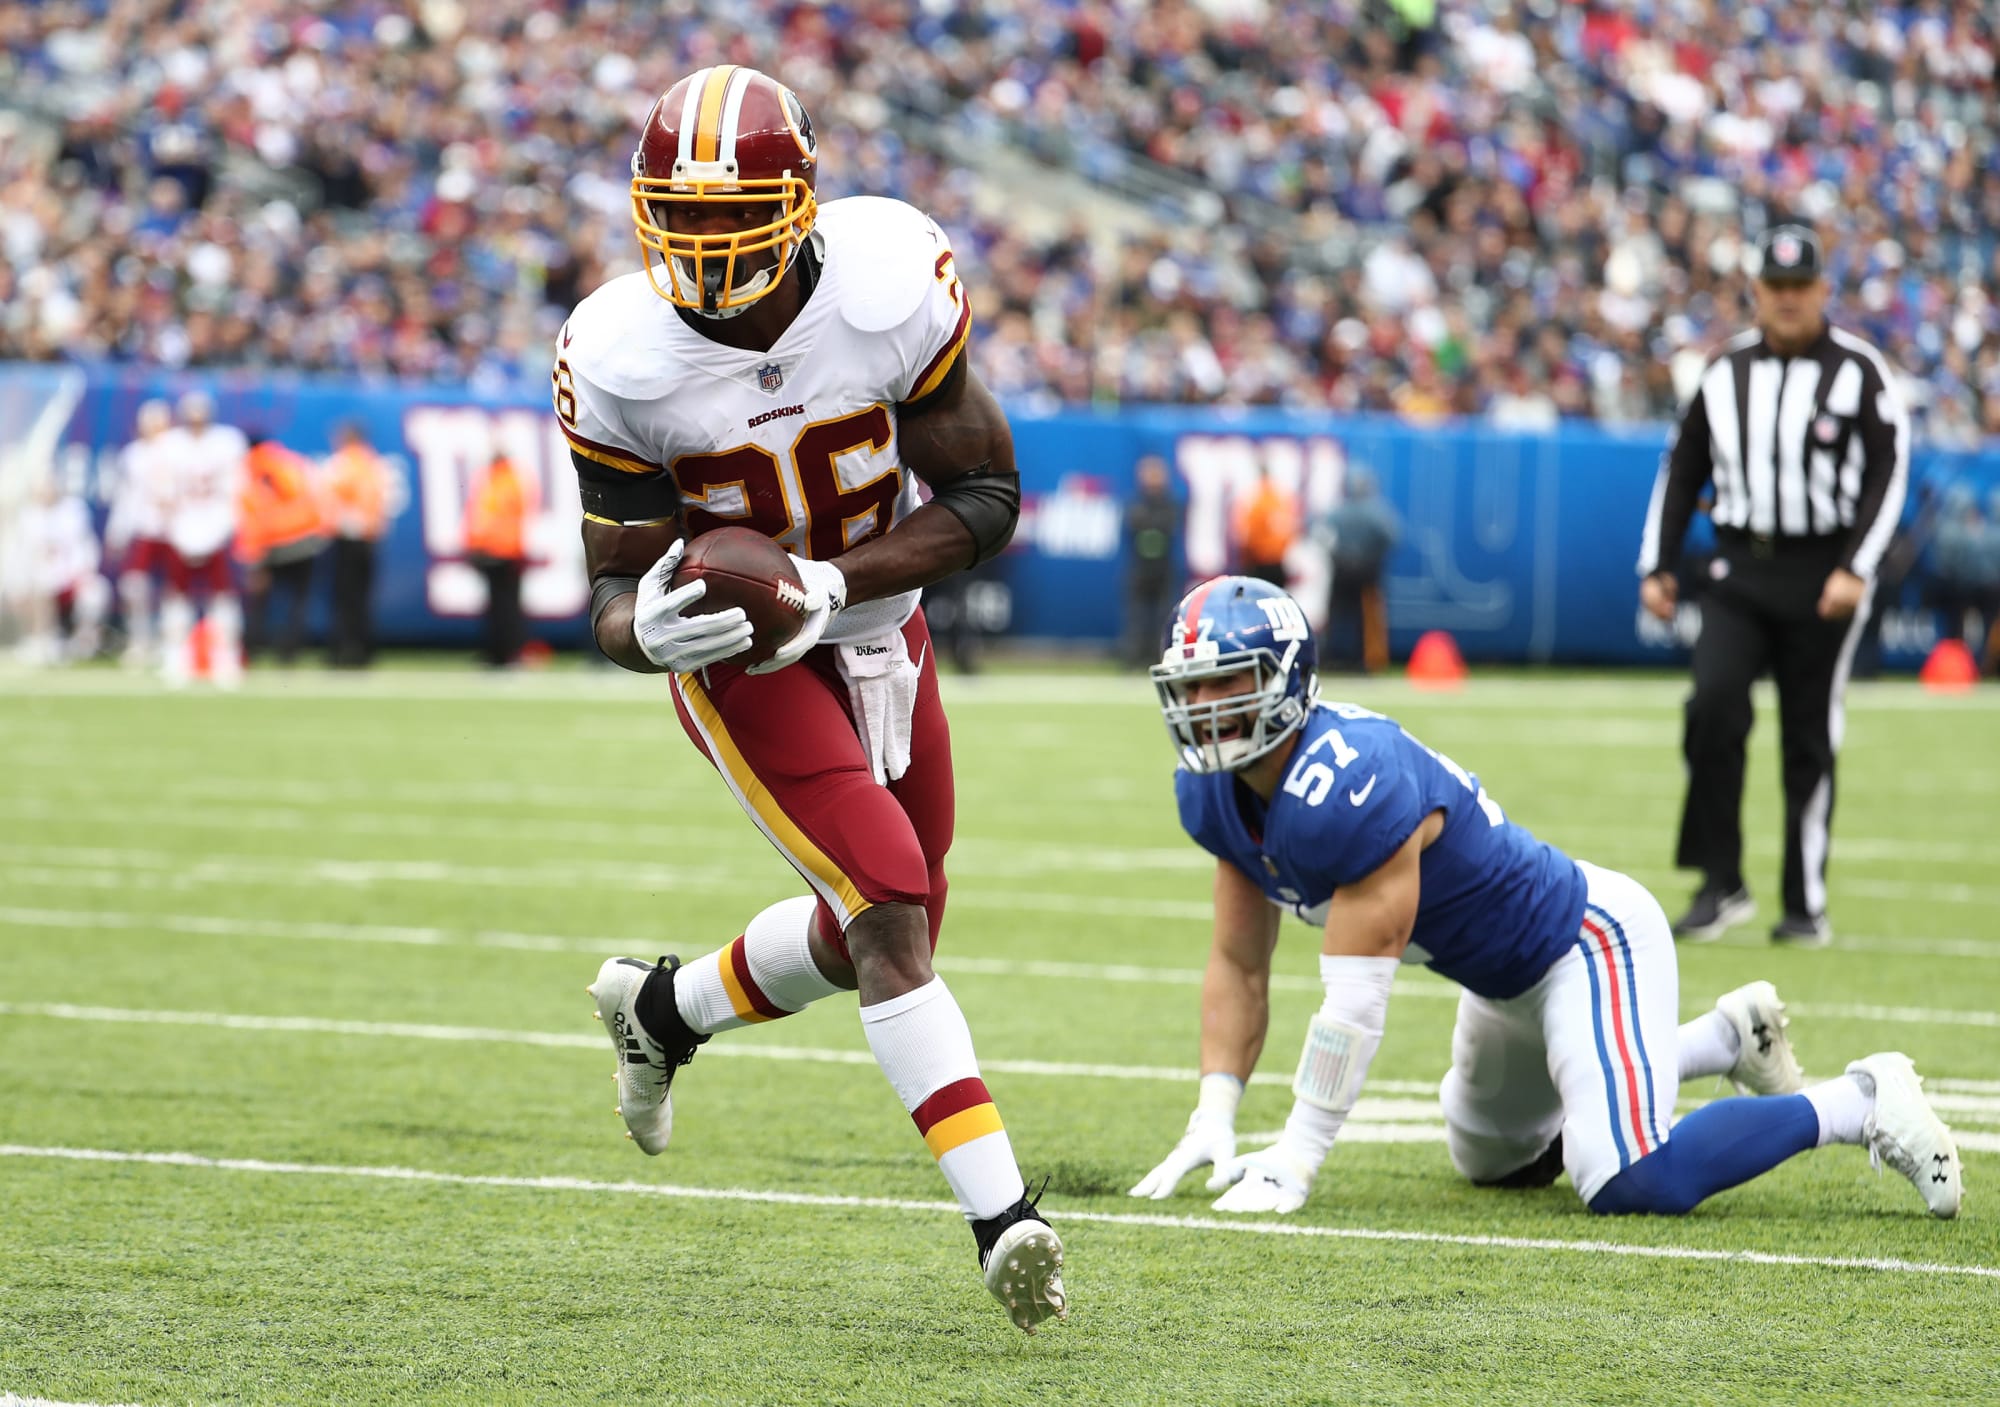 Redskins vs. Giants, part two Storylines, how to watch, and more